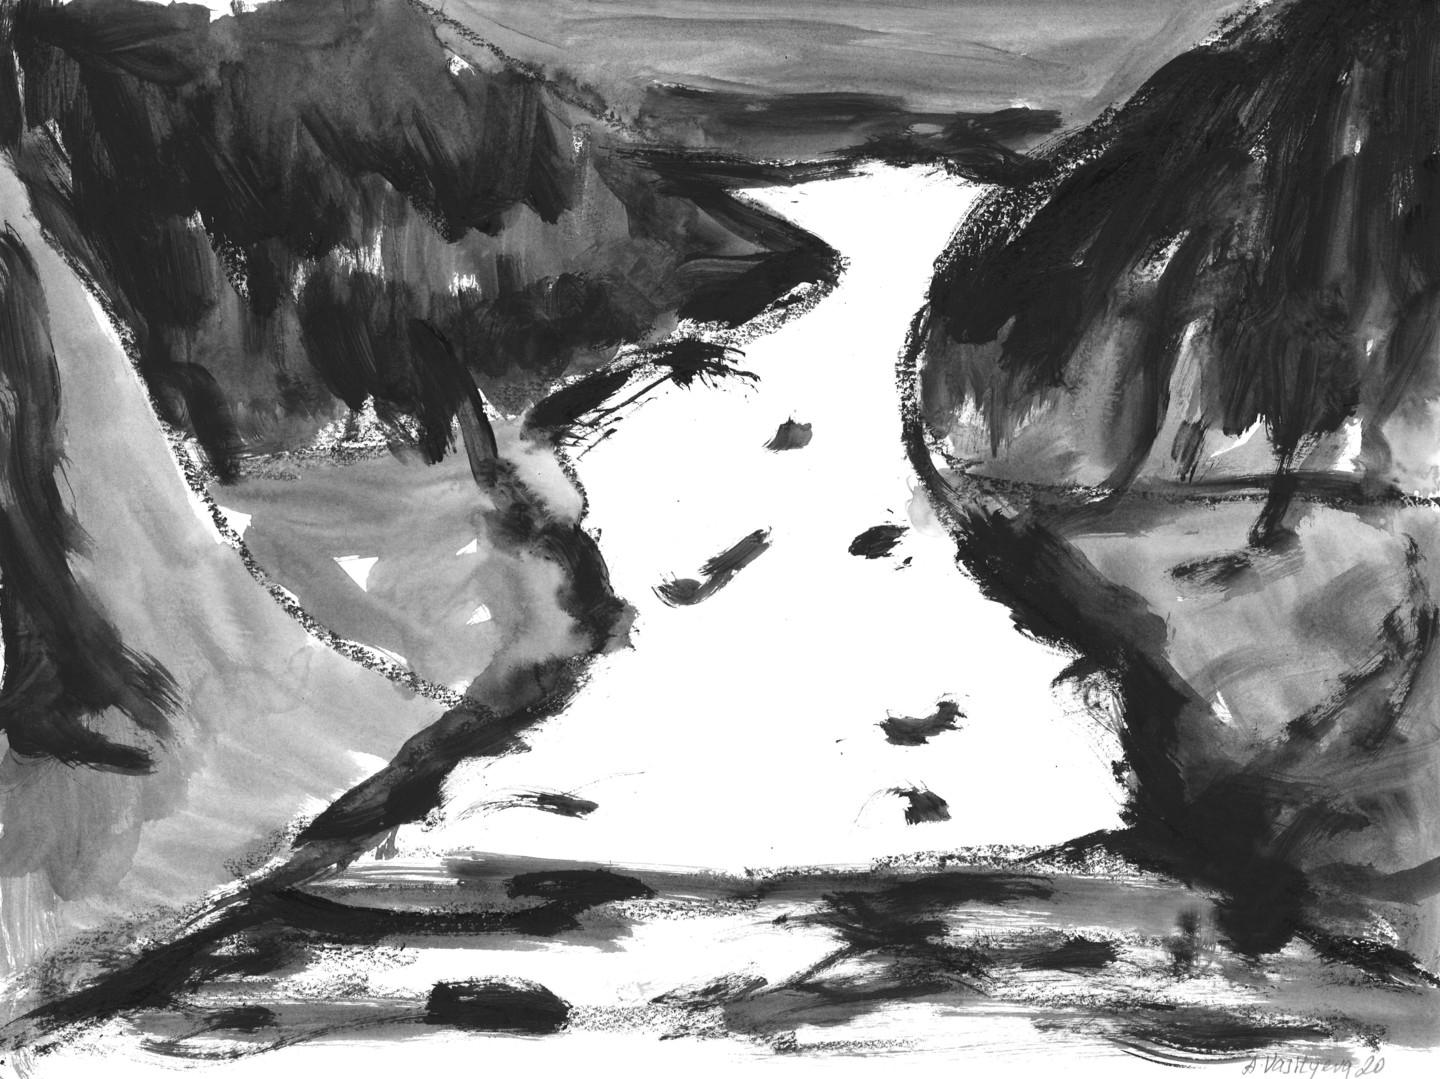 Anastasia Vasilyeva - Mountains 002 (2020)

Abstract landscape, painting in black, grey, white colors. Artwork represents Alps in winter, covered with snow and mist above it. Painting was made with mixed media, acrylic and watercolor on paper in